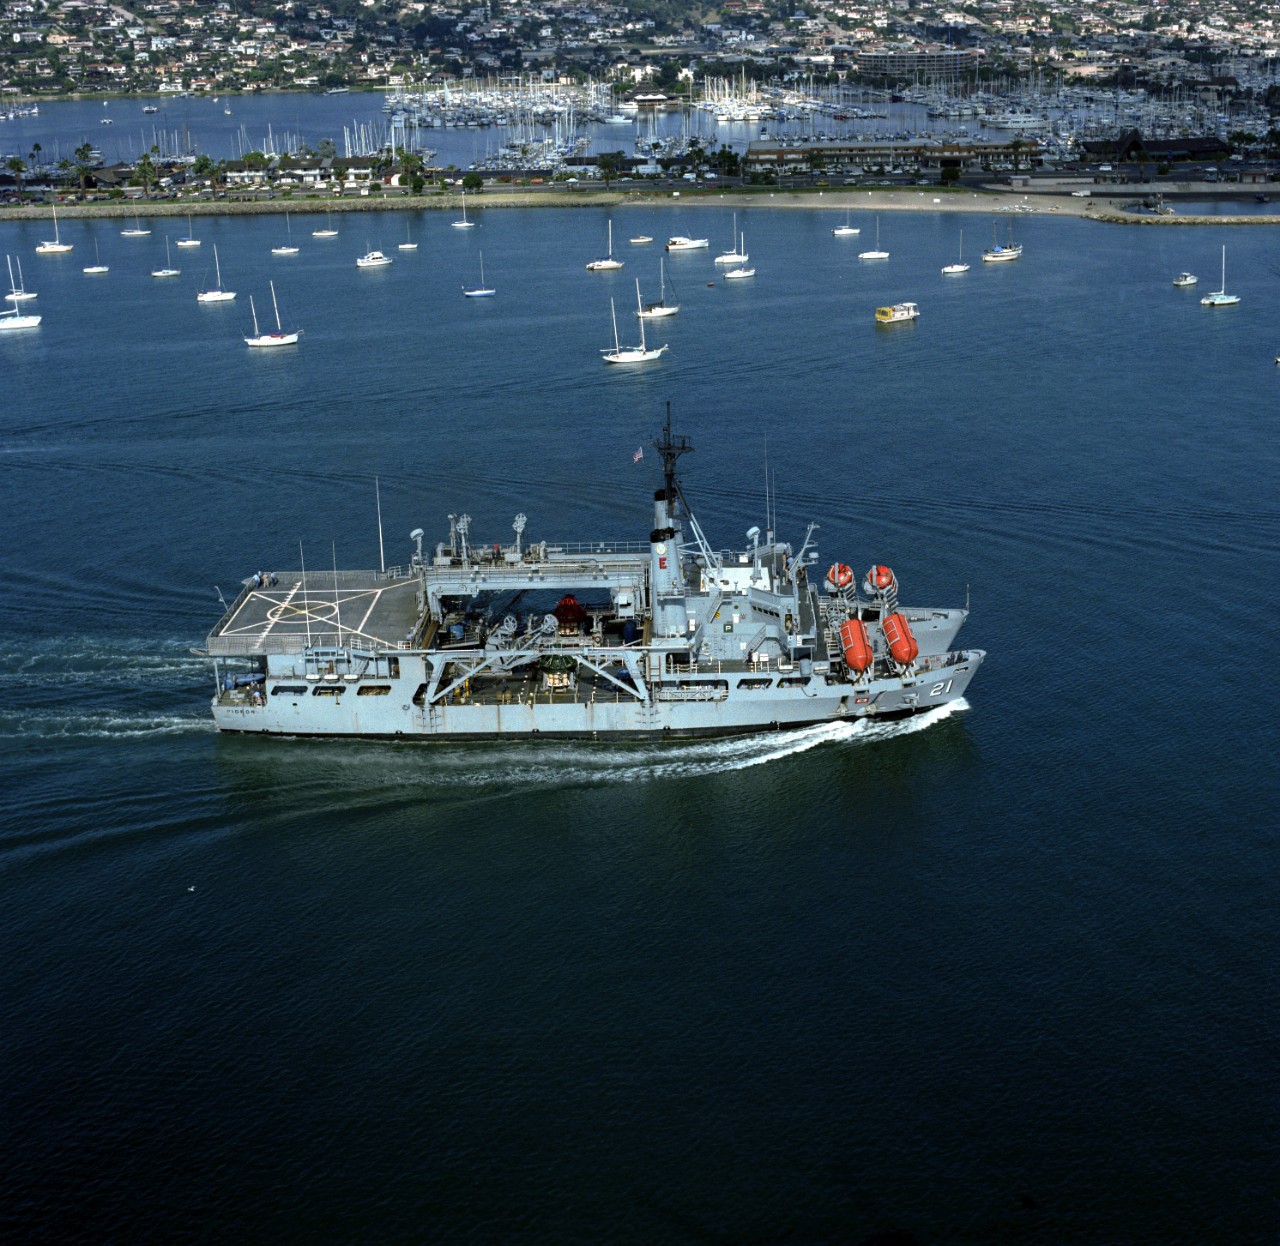 330-CFD-DN-SC-05-06689:   USS Pigeon (ASR-21), 1986.   Aerial starboard view of the US Navy submarine rescue ship, which serves as a surface support ship for deep submergence rescue vehicles (DSRVs) during submarine rescue operations.   Photographed by PH3 Petty, October 17, 1986.  Official U.S. Navy Photograph, now in the collections of the National Archives.    